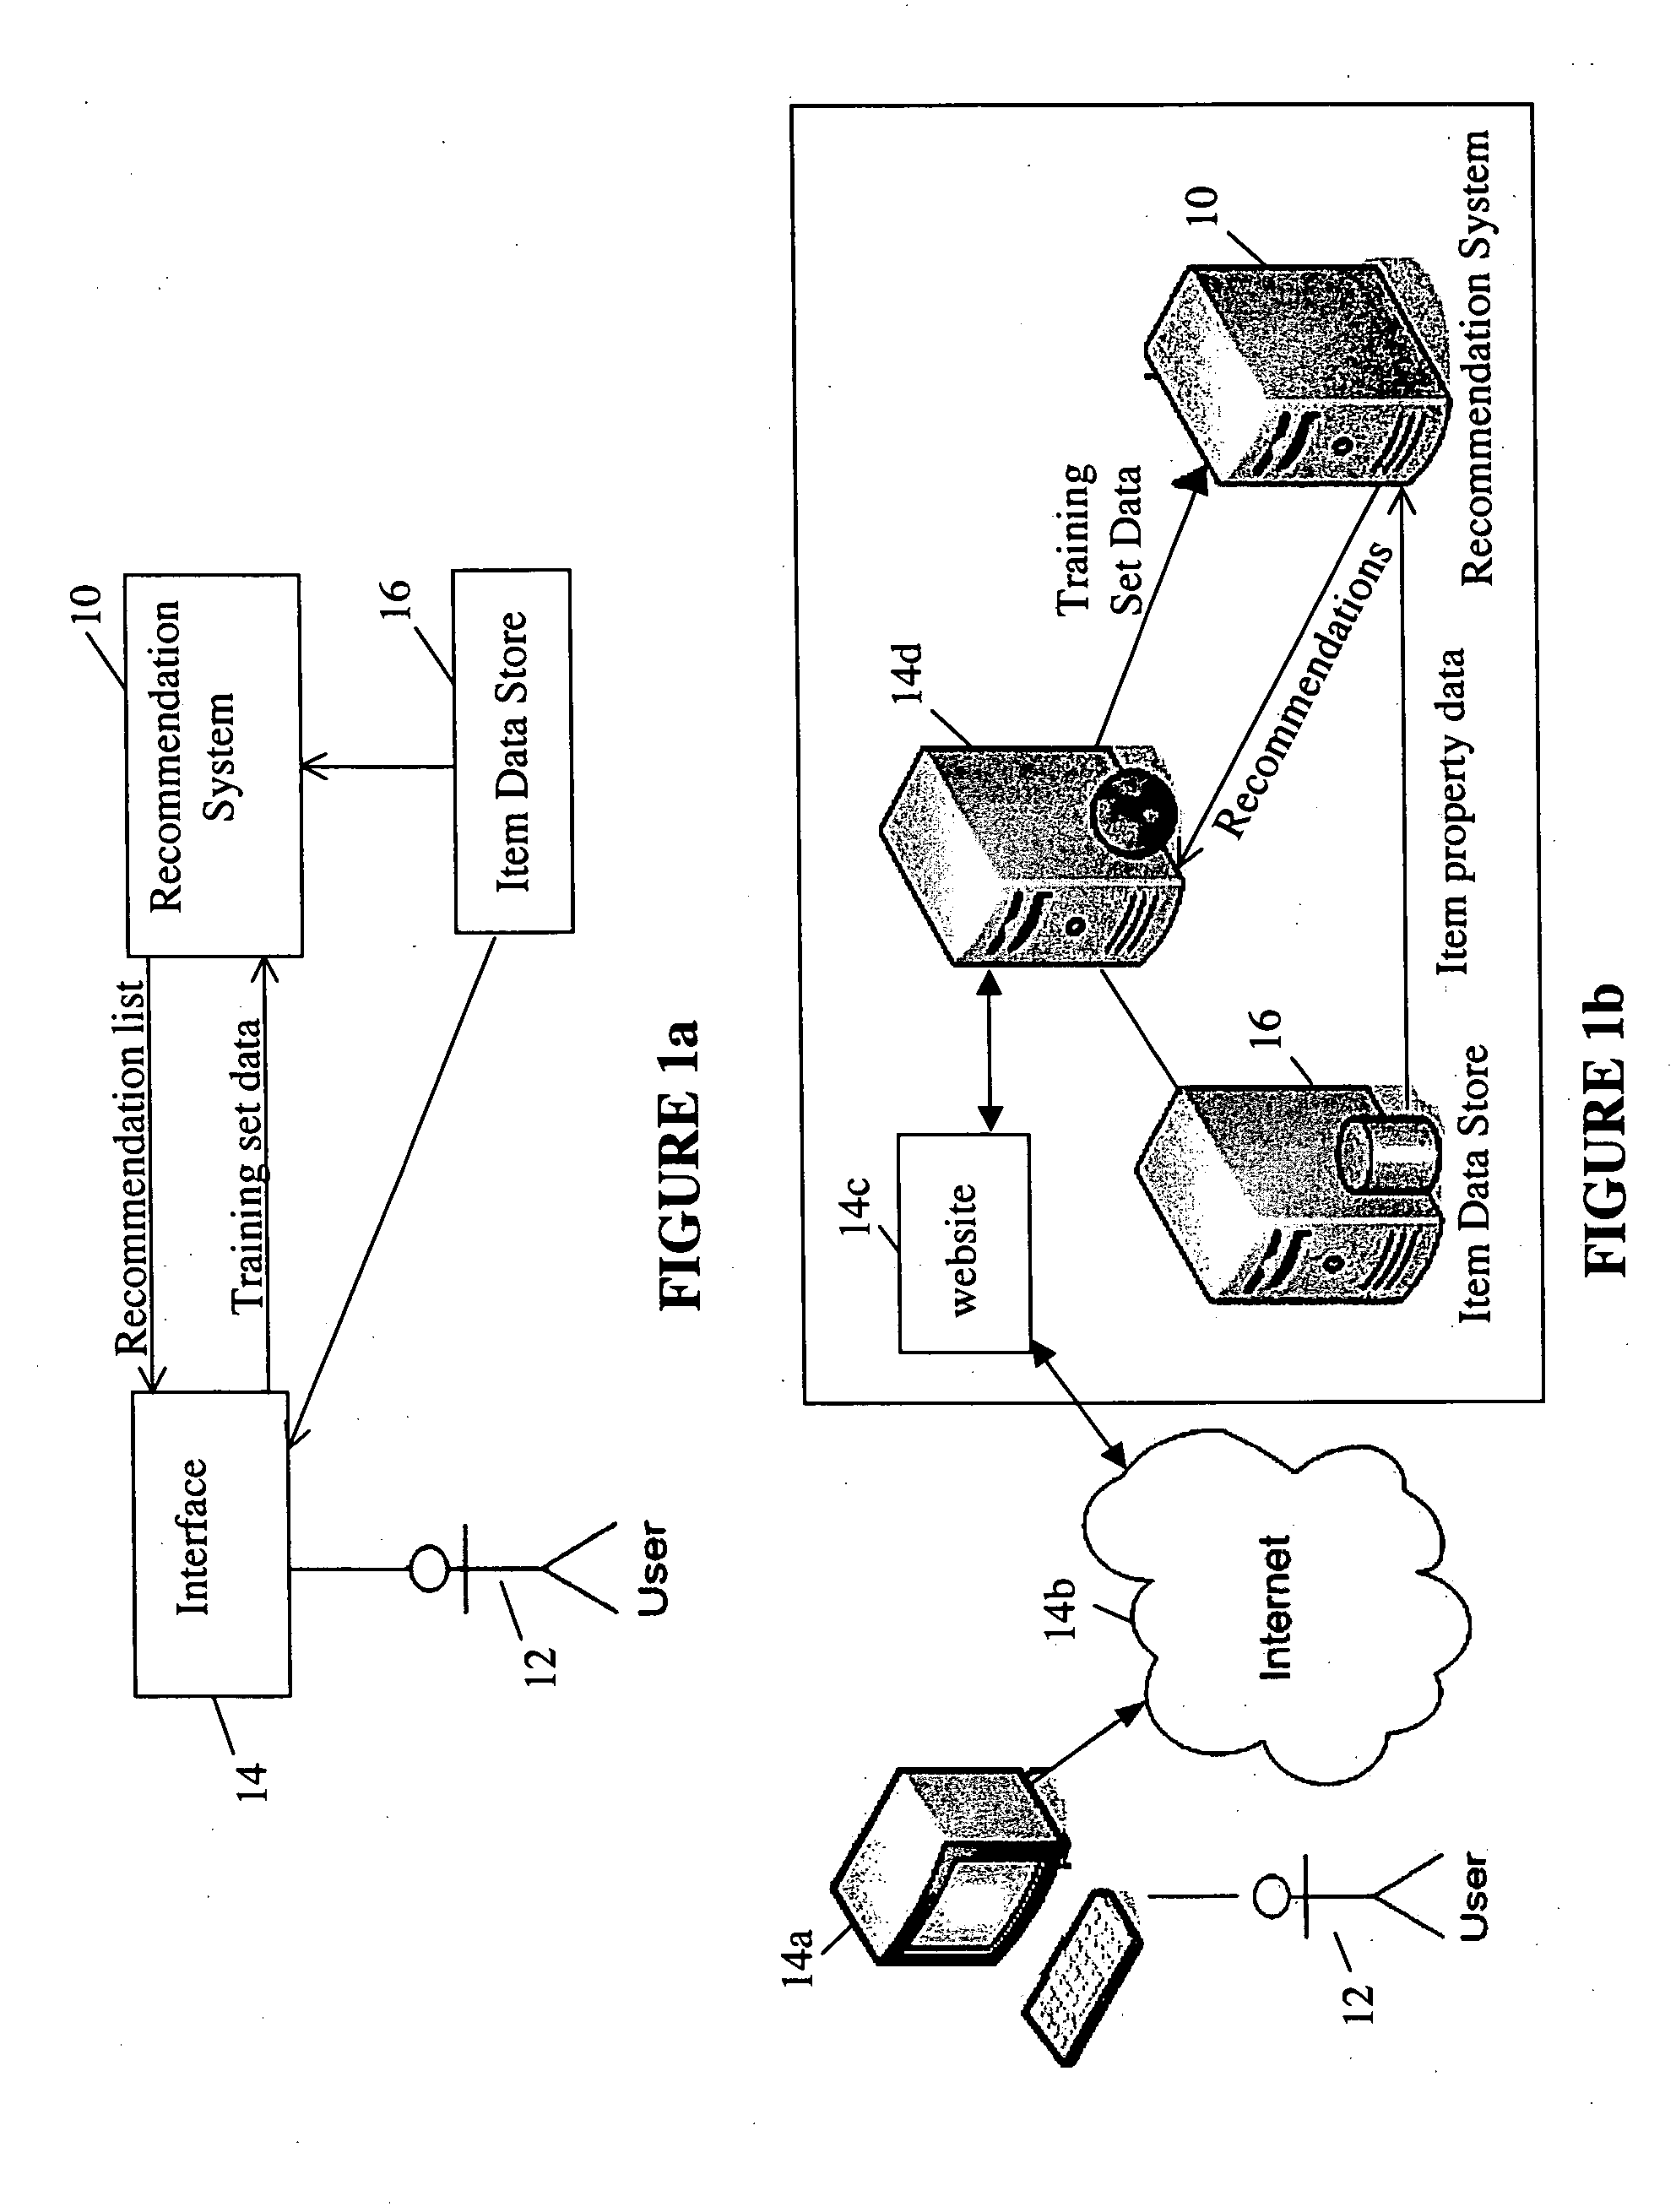 System and method for estimating user ratings from user behavior and providing recommendations